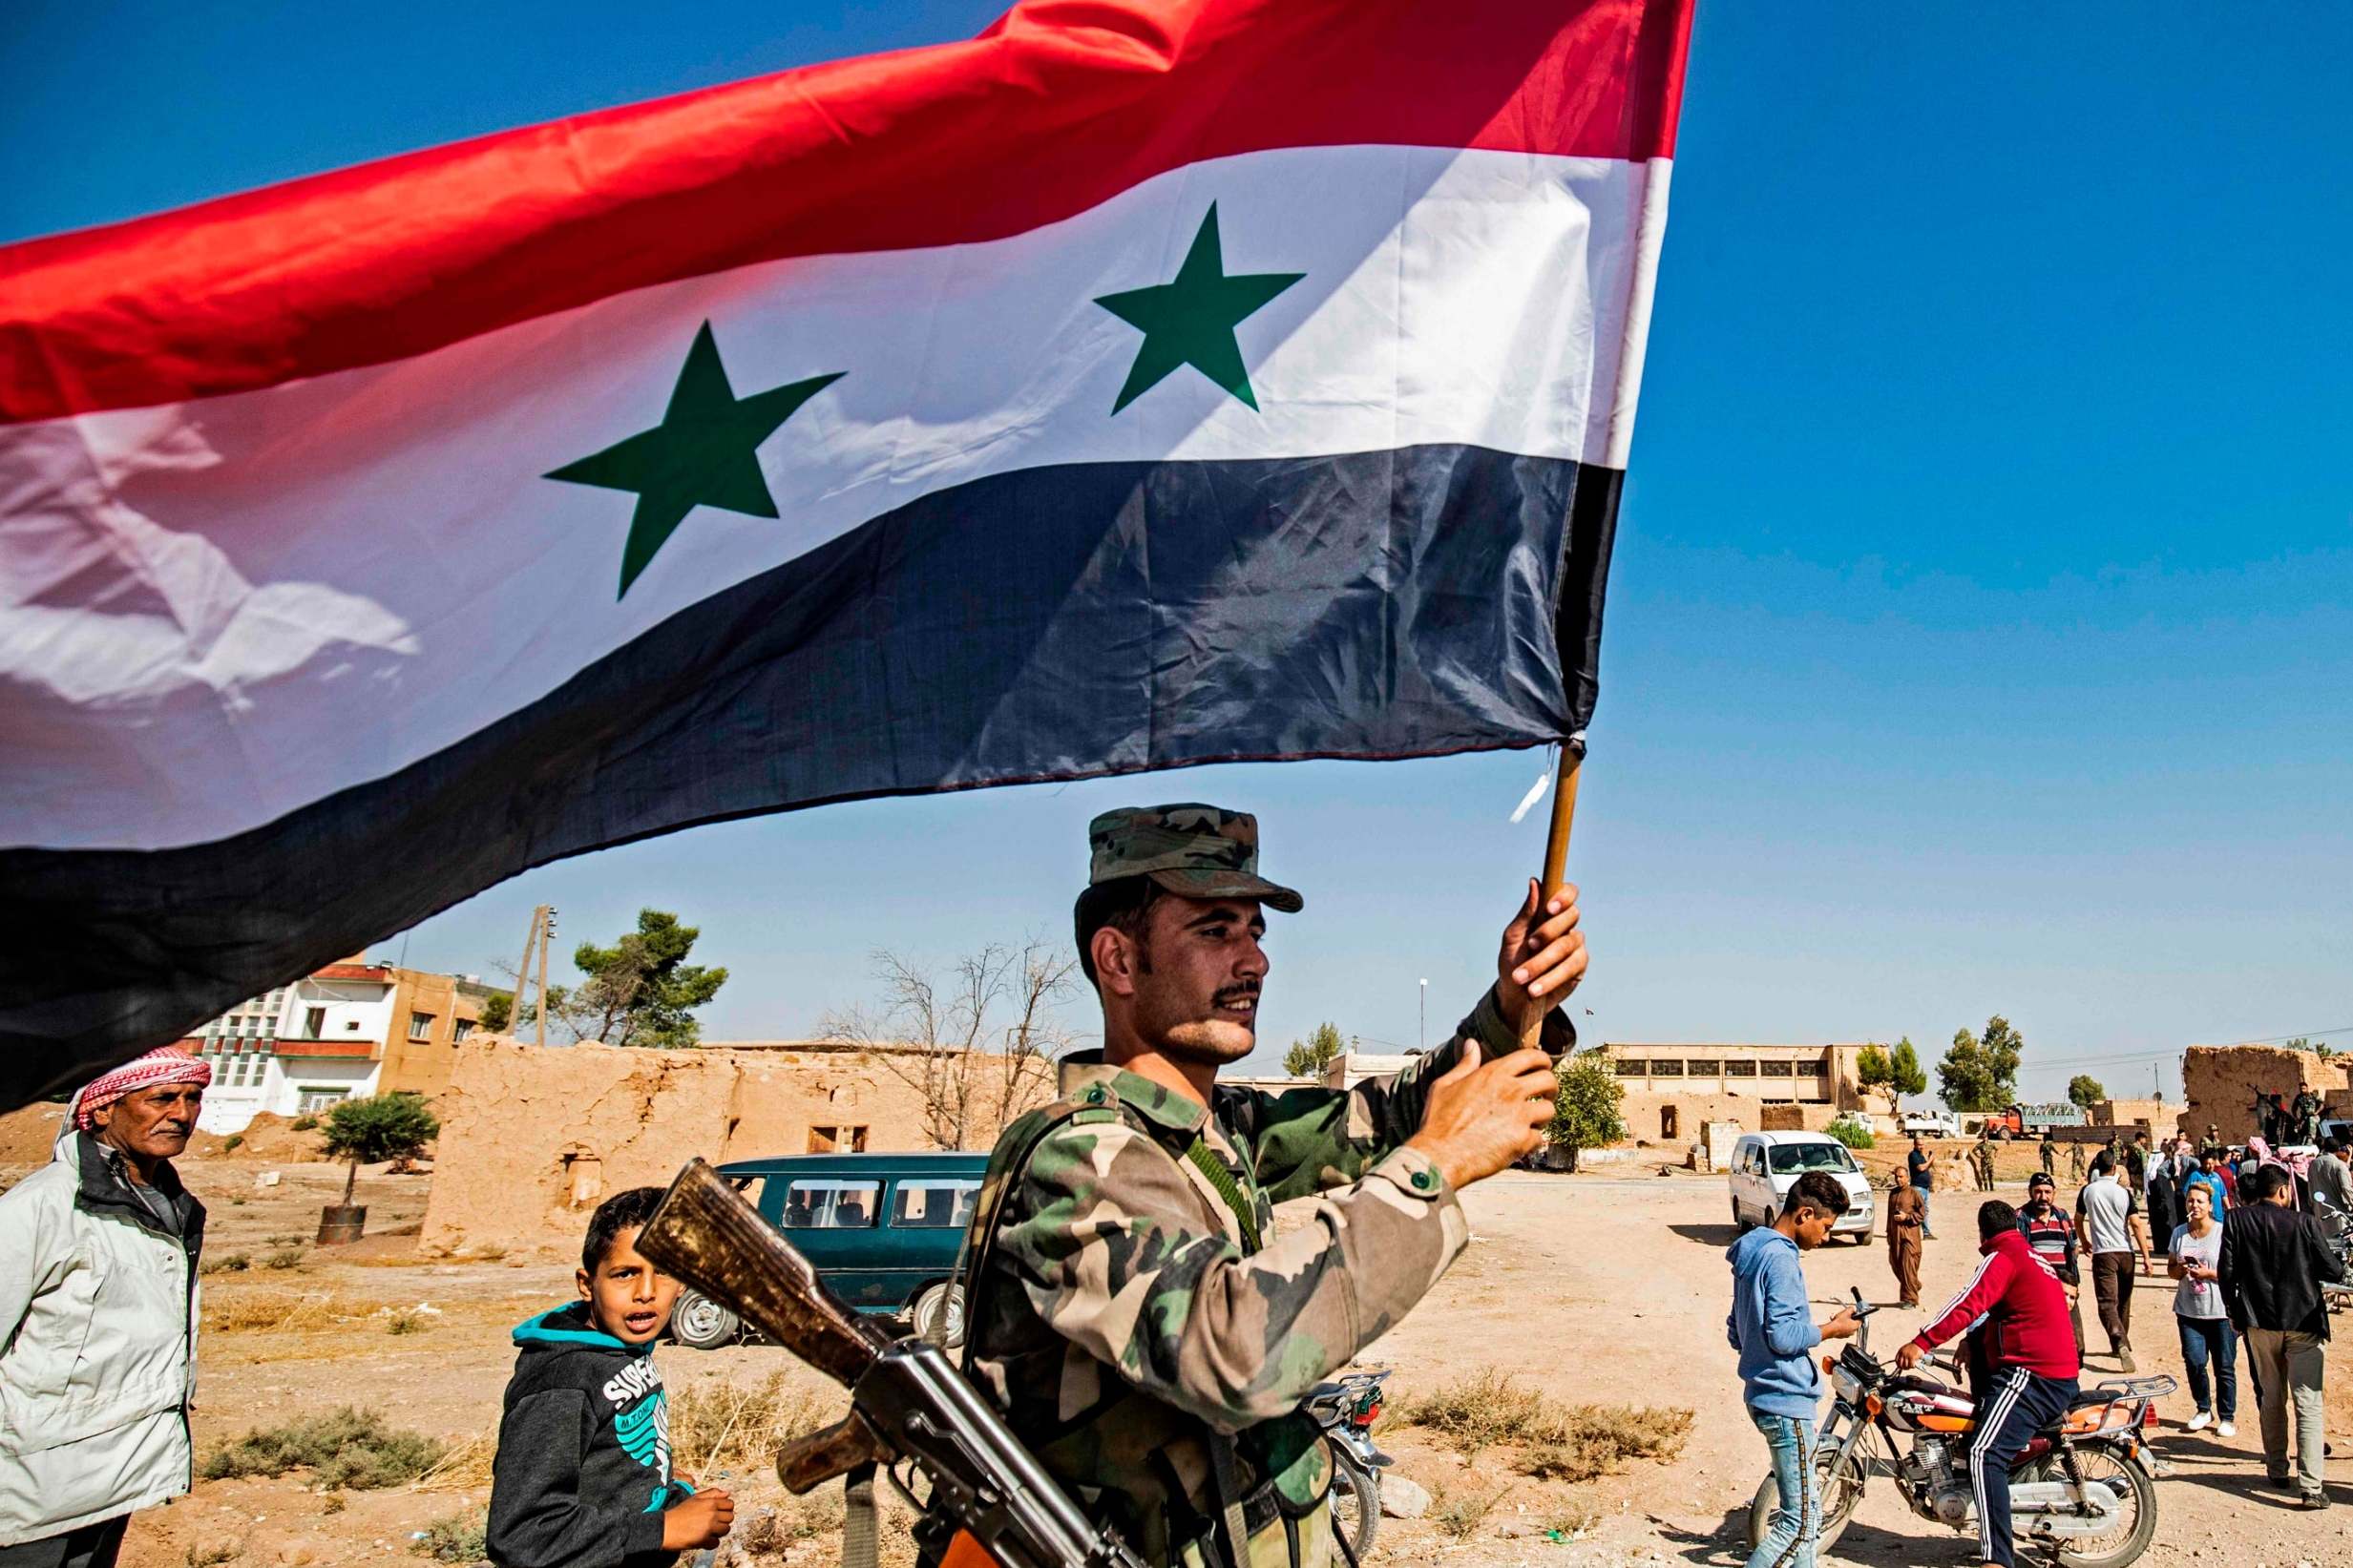 The Syrian flag is raised by Assad’s forces upon entering Kurdish-held territory